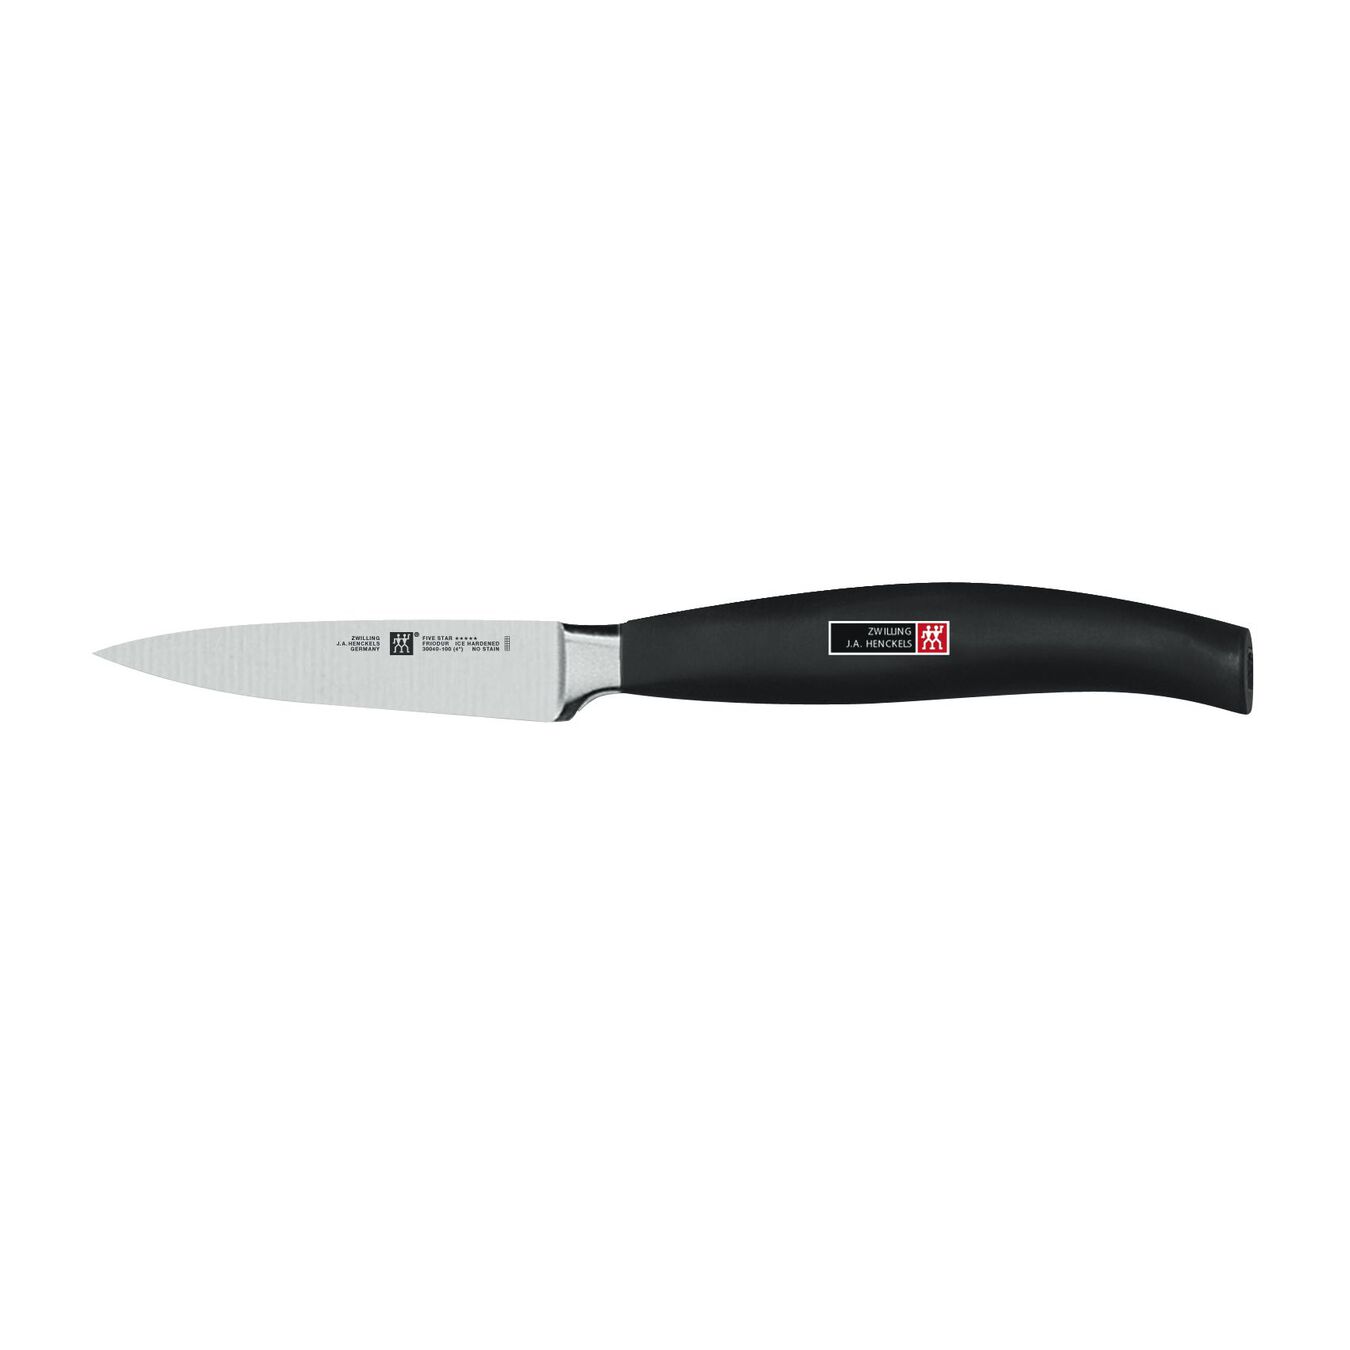 4-inch, Paring knife,,large 4